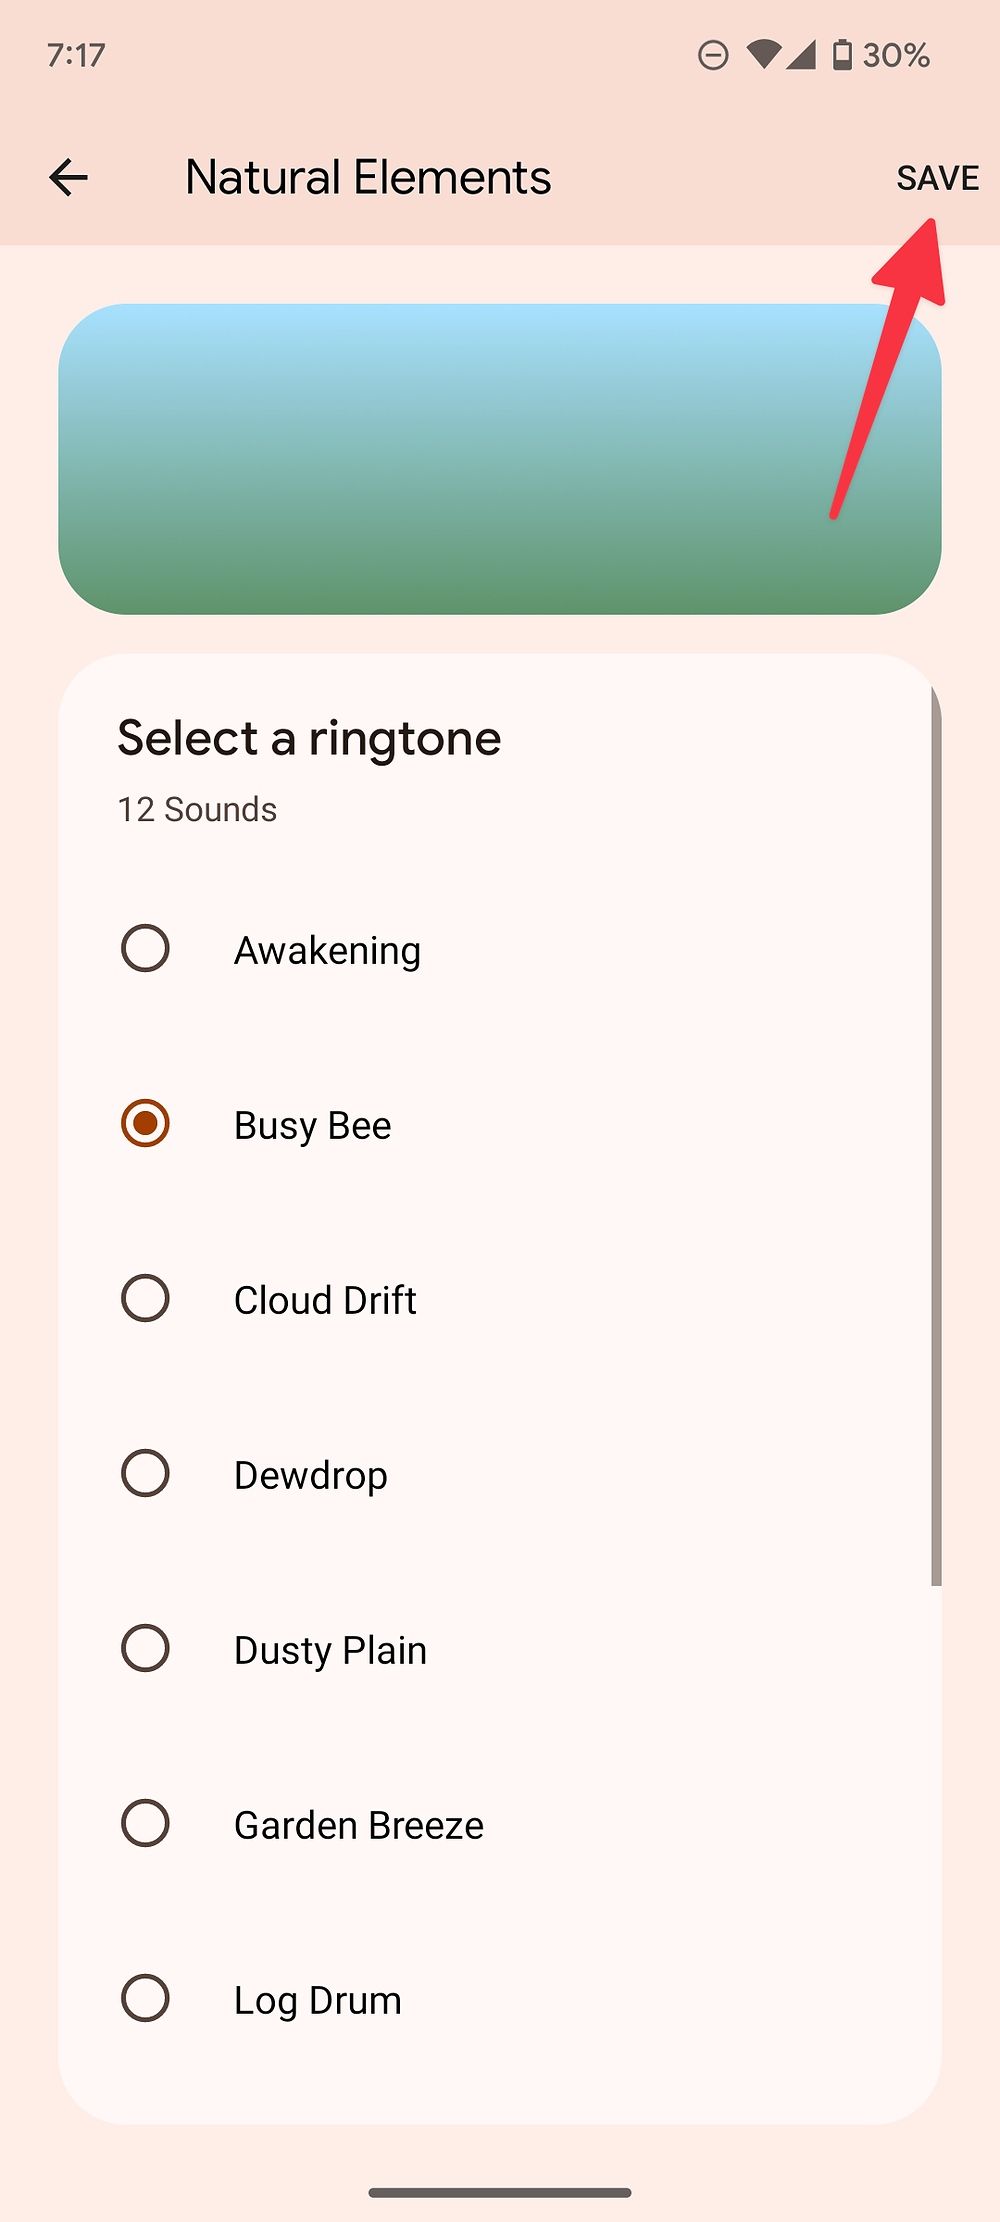 save a new ringtone on Android